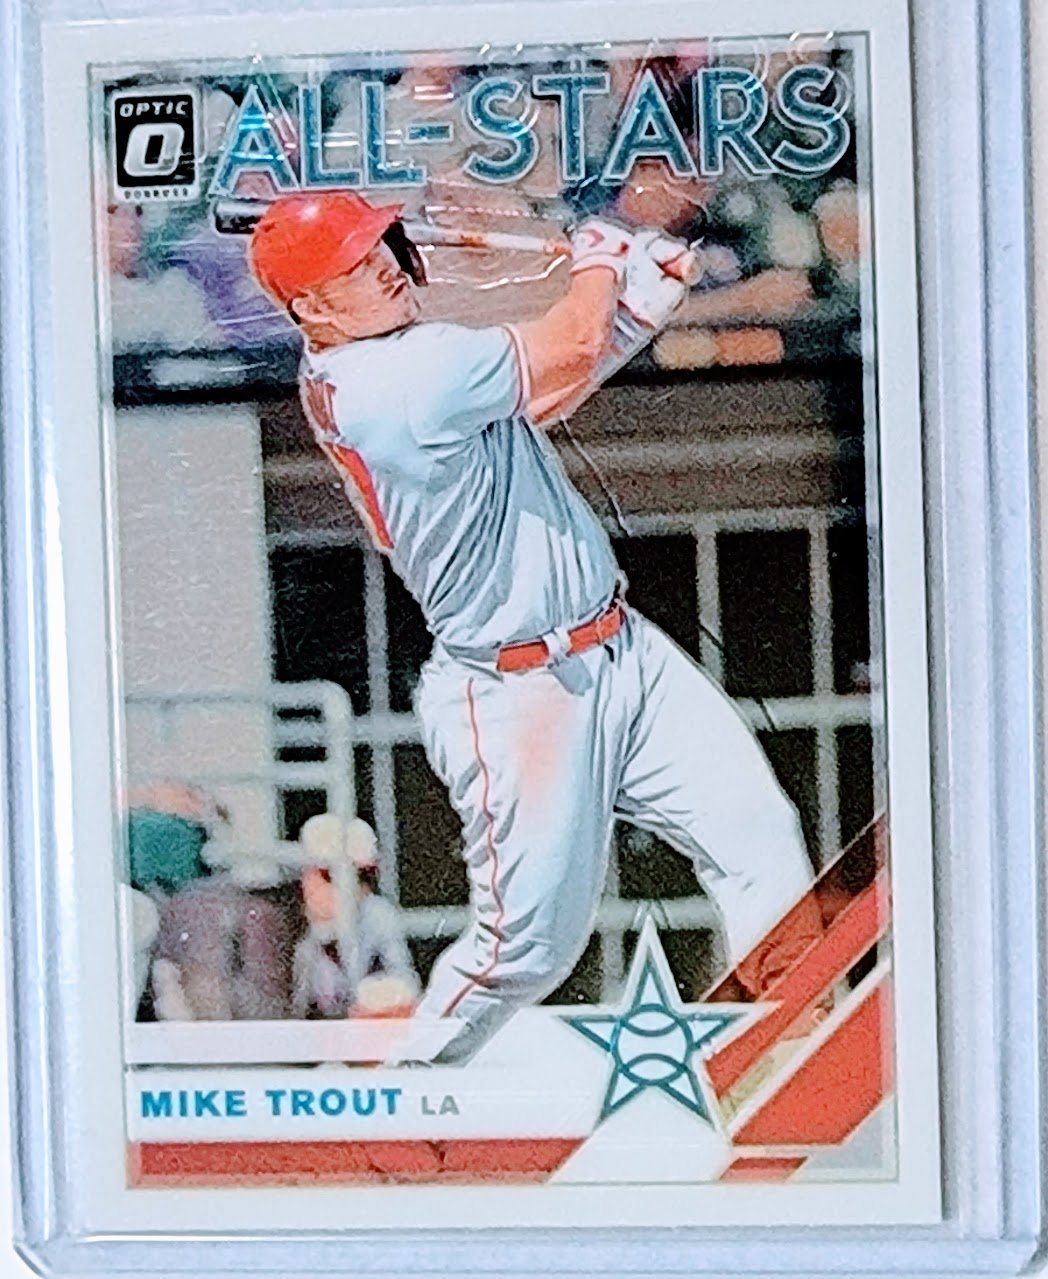 2019 Donruss Optic Mike Trout All Star Baseball Trading Card TPTV simple Xclusive Collectibles   